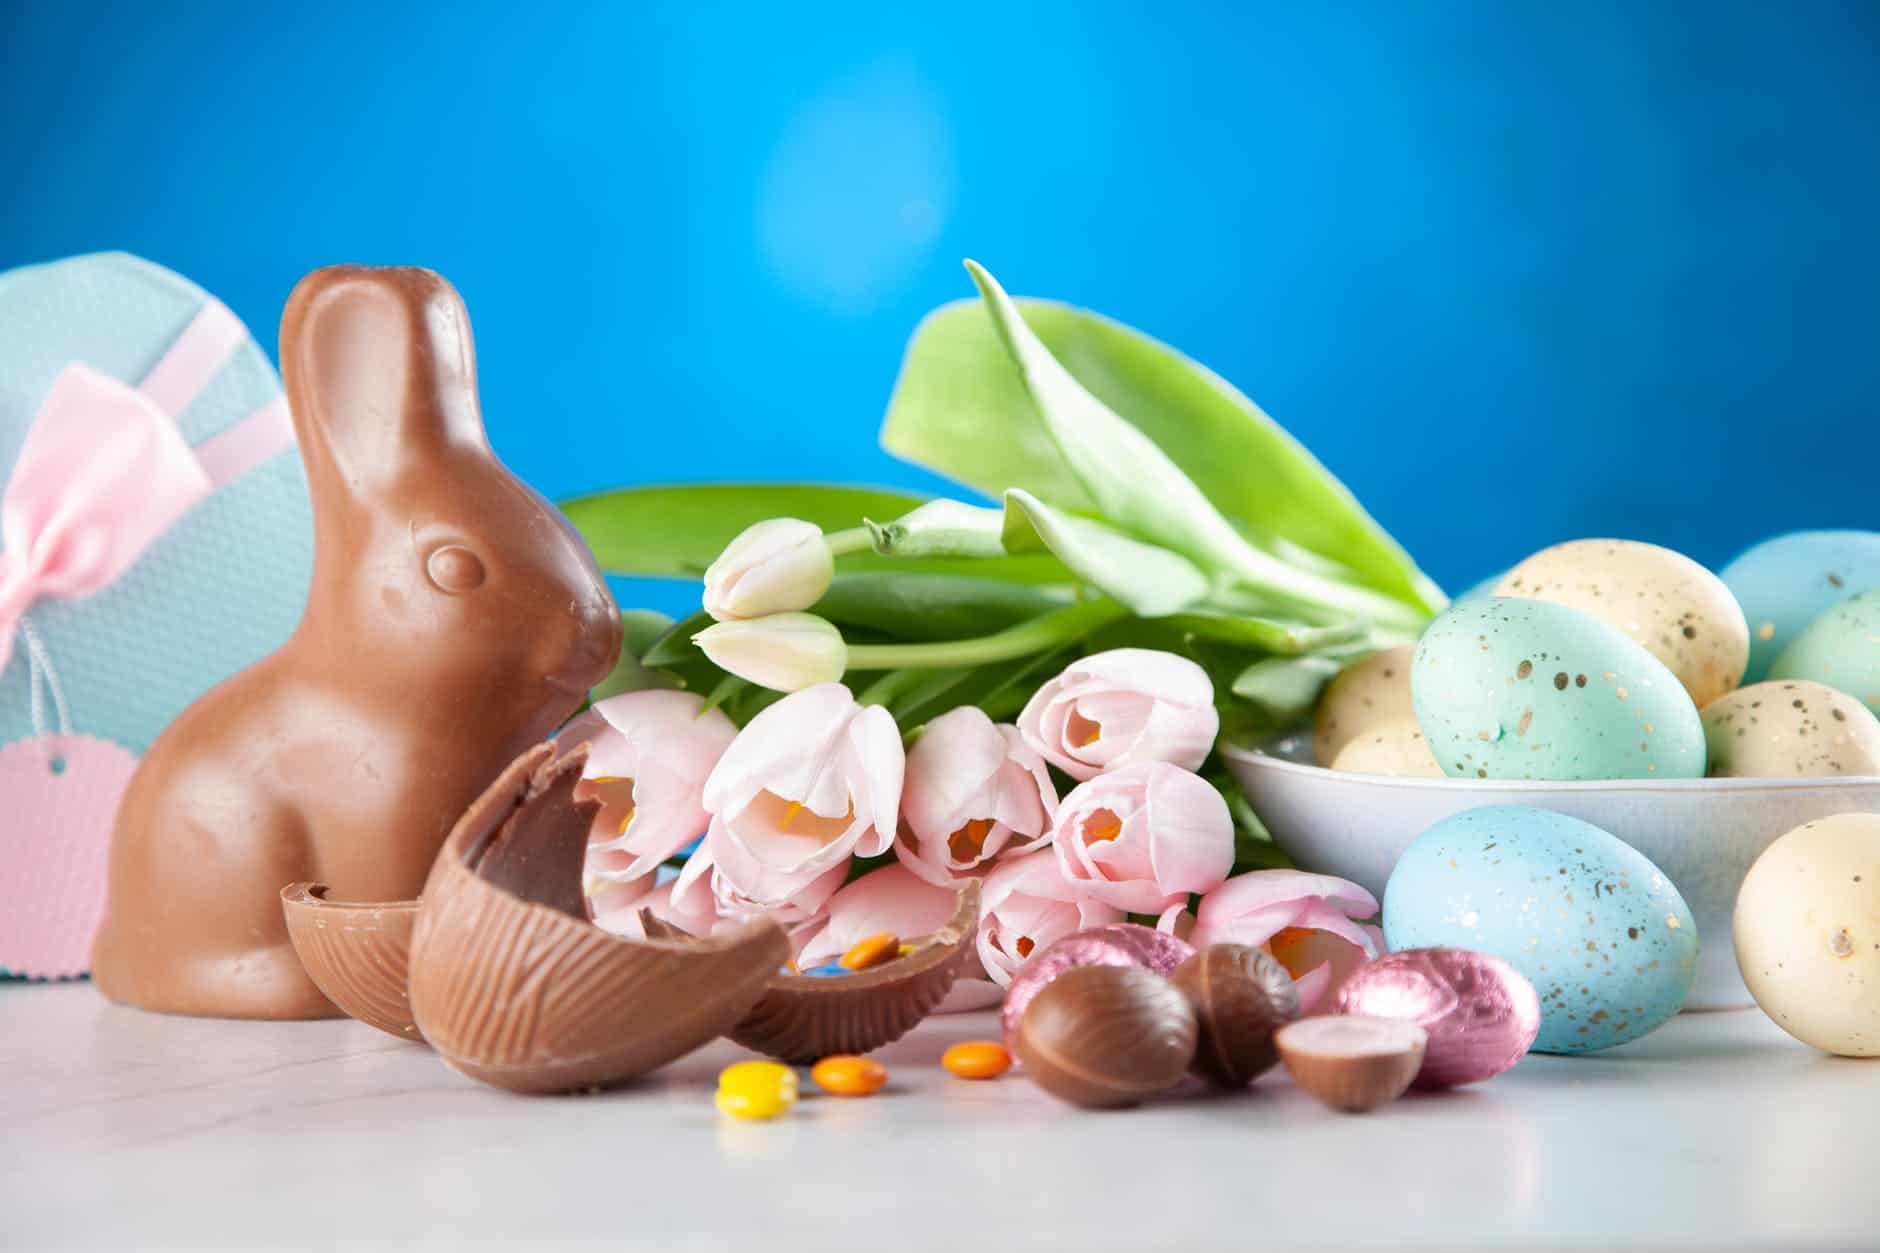 70 Fun Facts About Easter You Must Know 